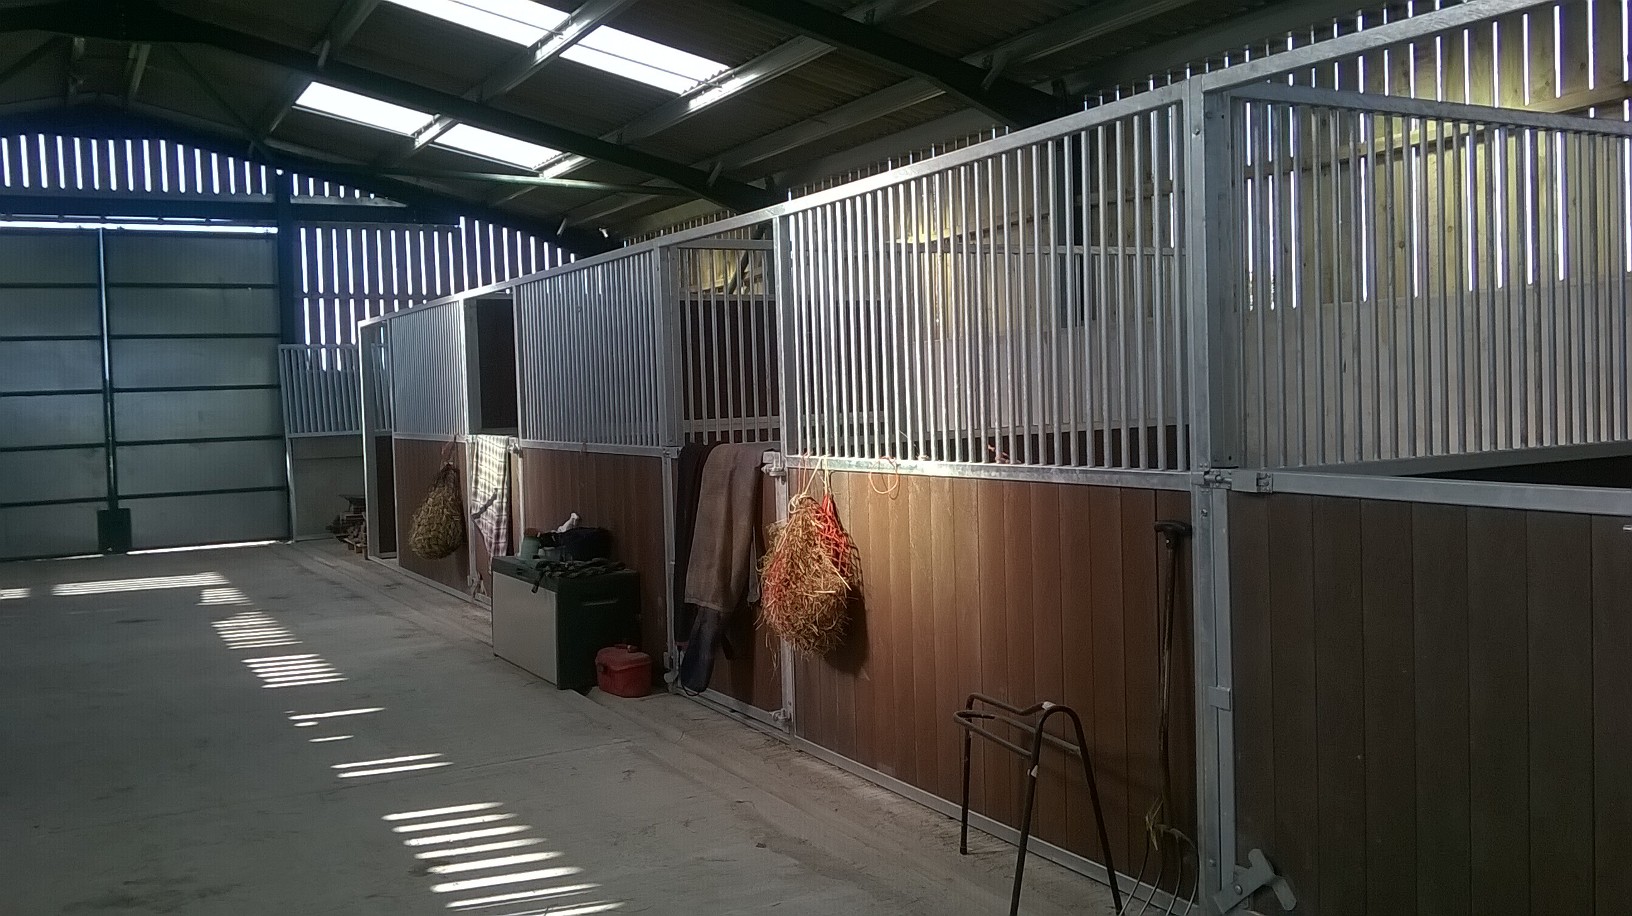 Internal Stables for Sale